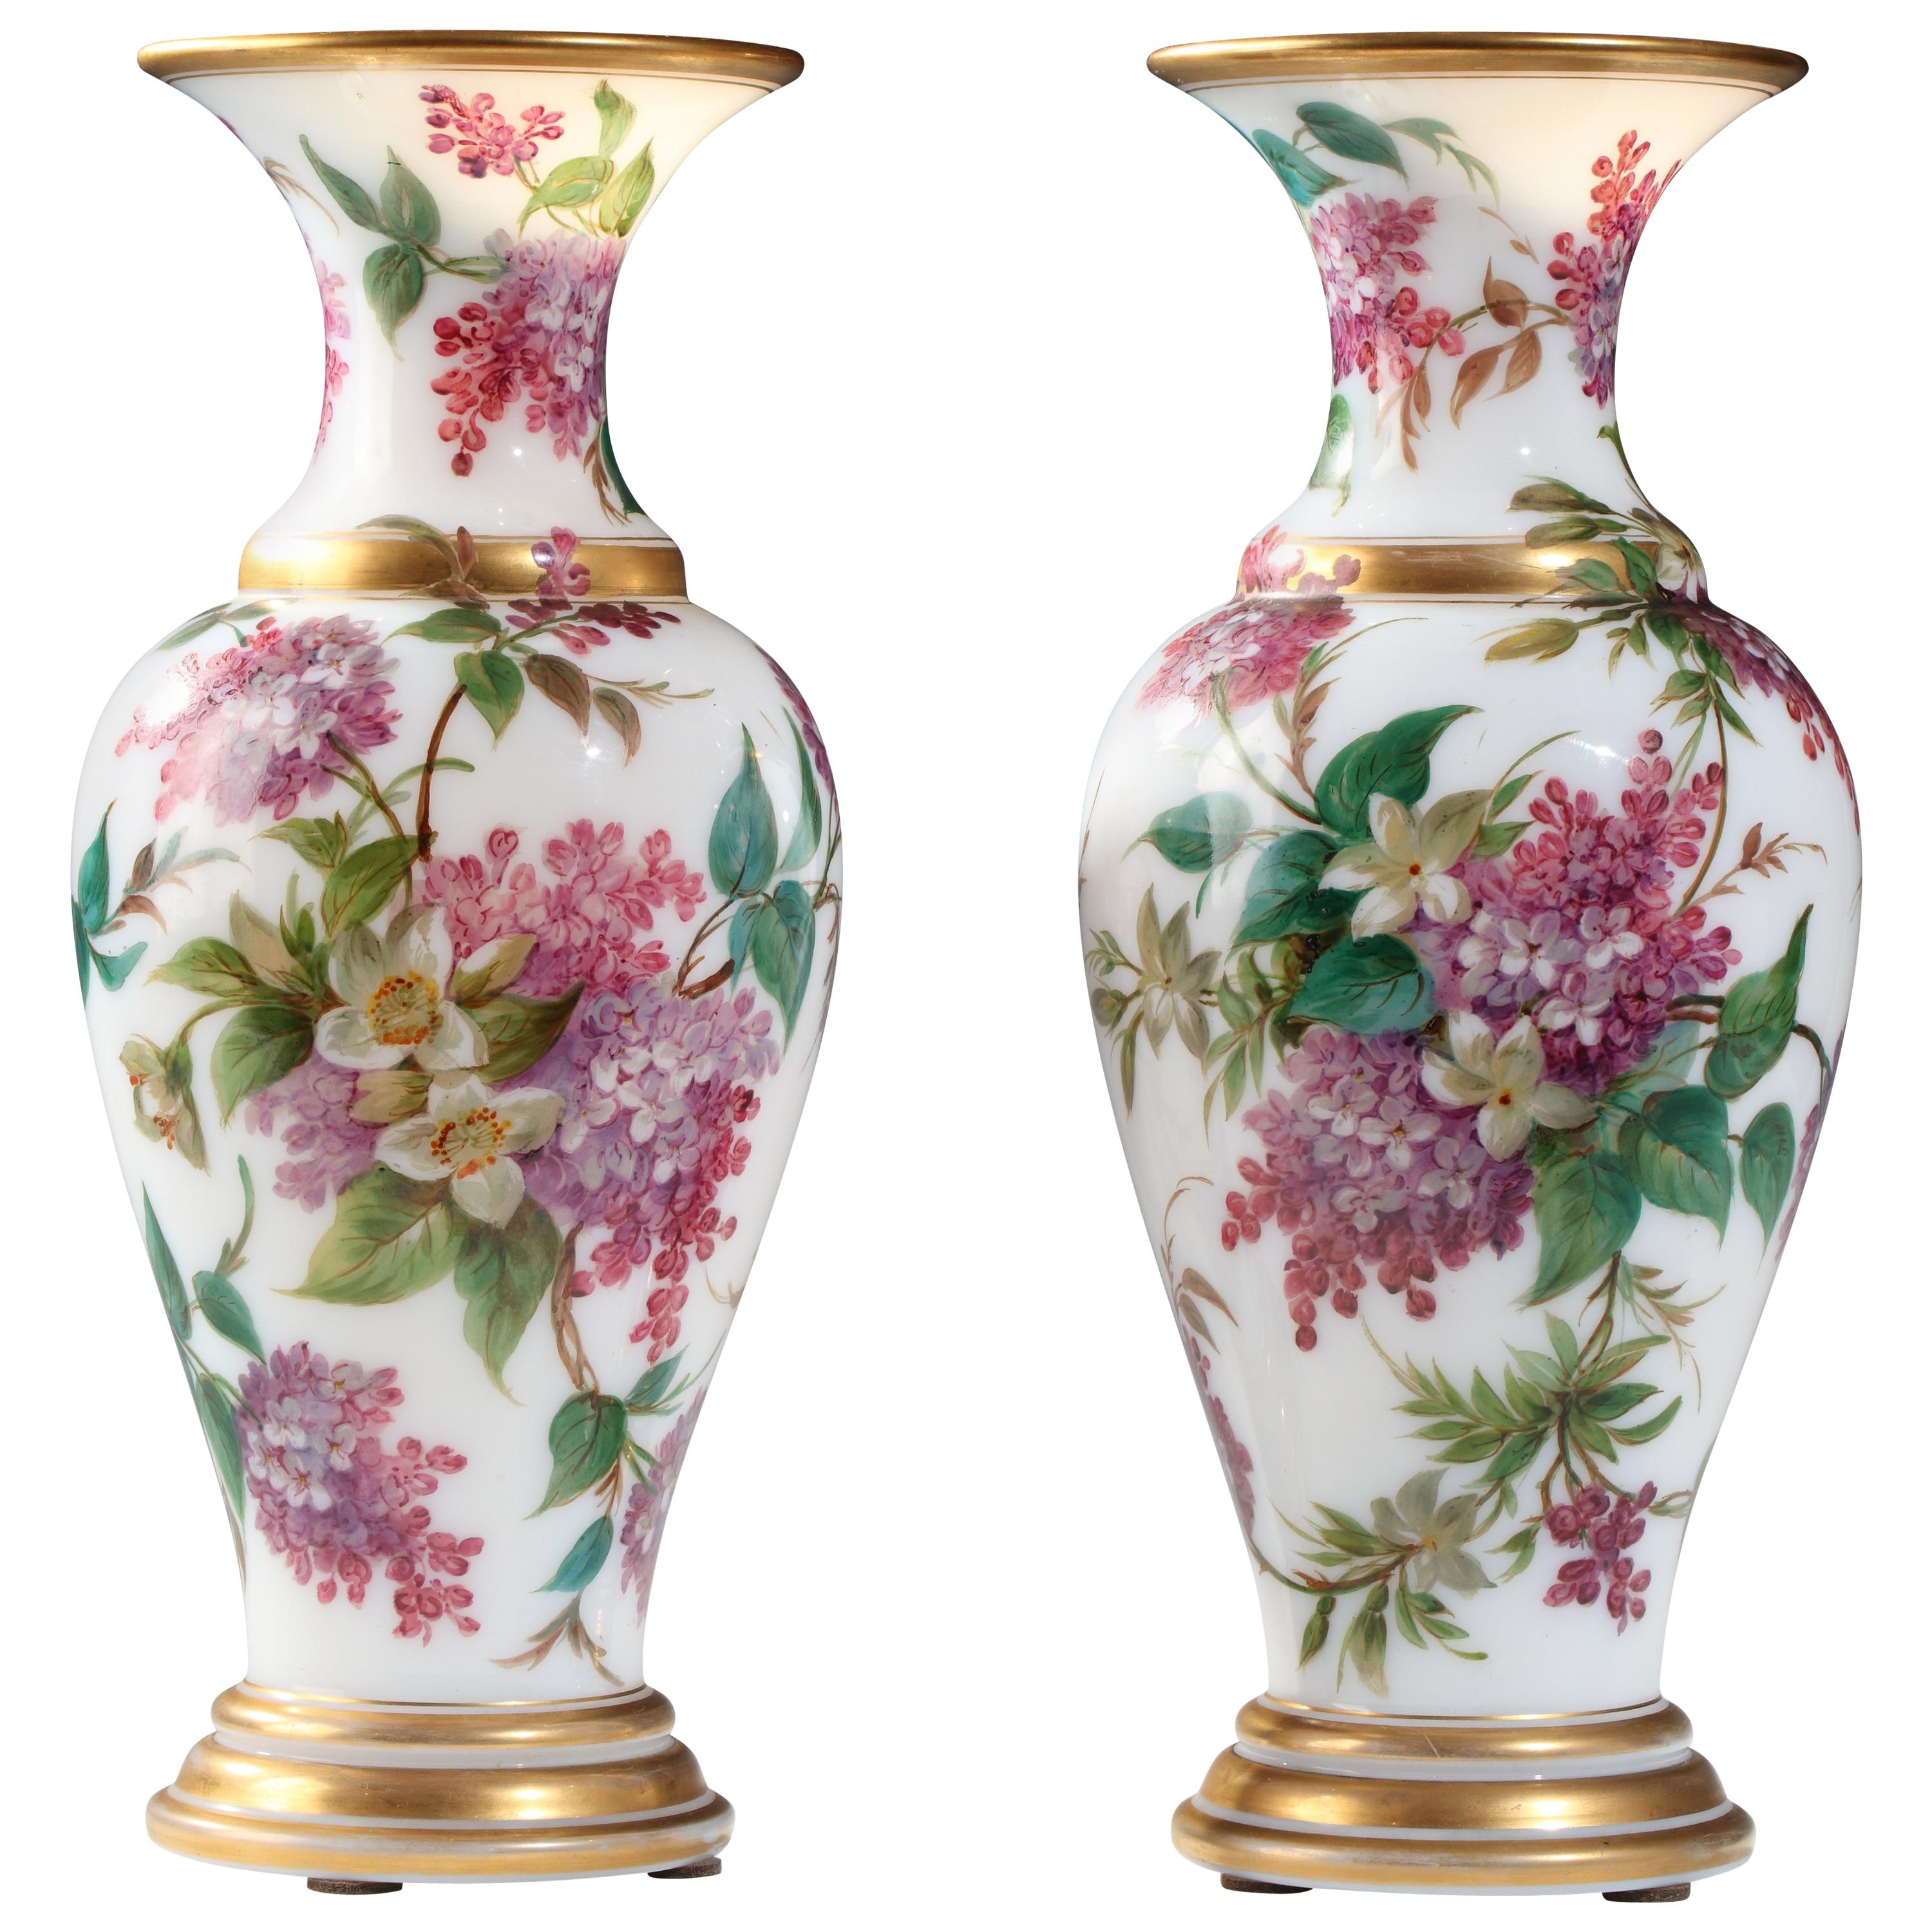 Charming Pair of Opal Crystal Vase Attributed to Baccarat, France, Circa 1860